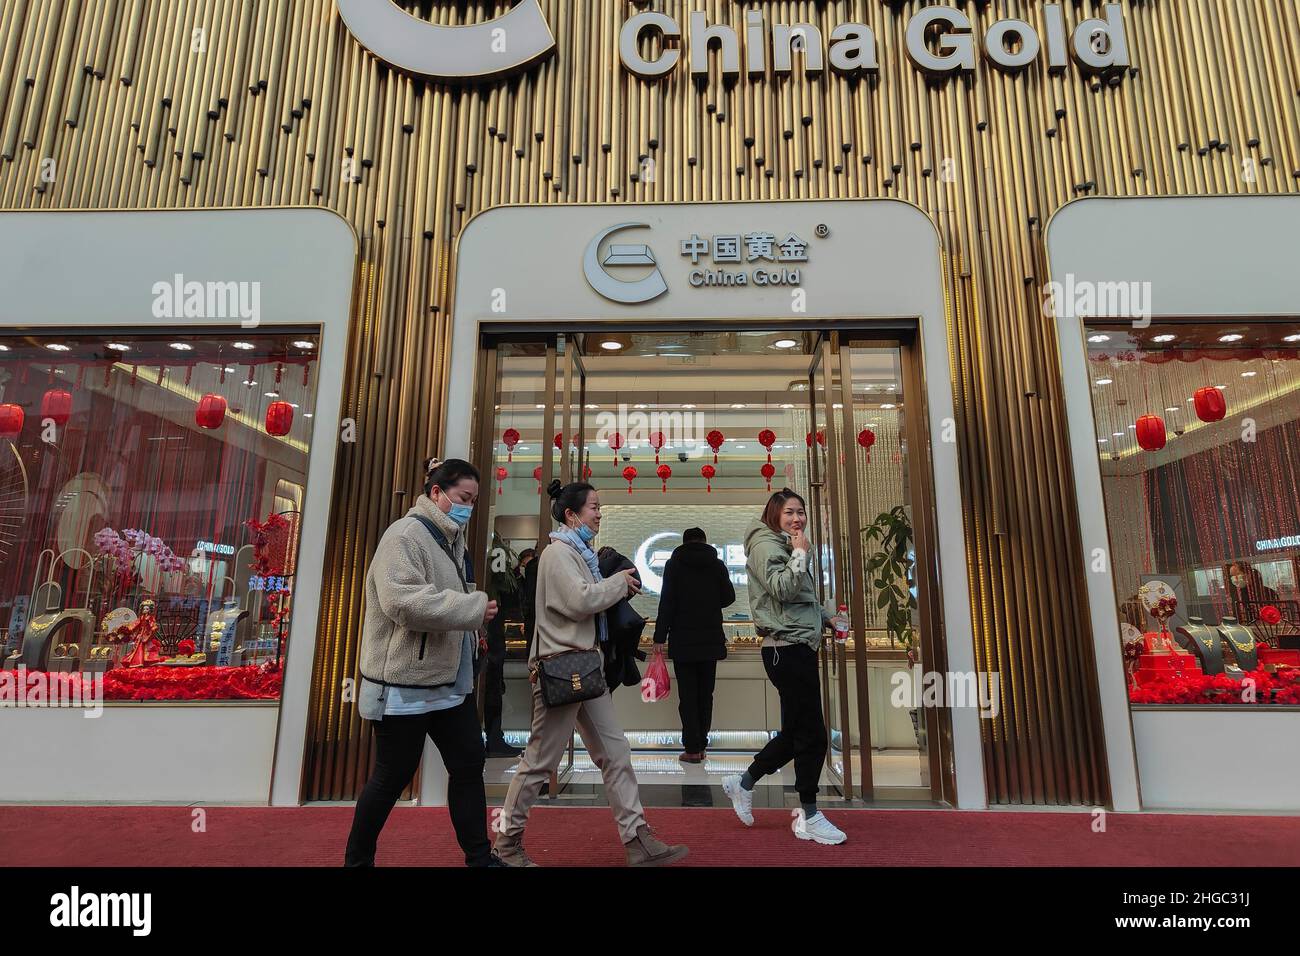 SHANGHAI, CHINA - JANUARY 19, 2022 - Customers choose and buy gold jewelry at a China Gold store in Shanghai, China, On January 19, 2022. Stock Photo